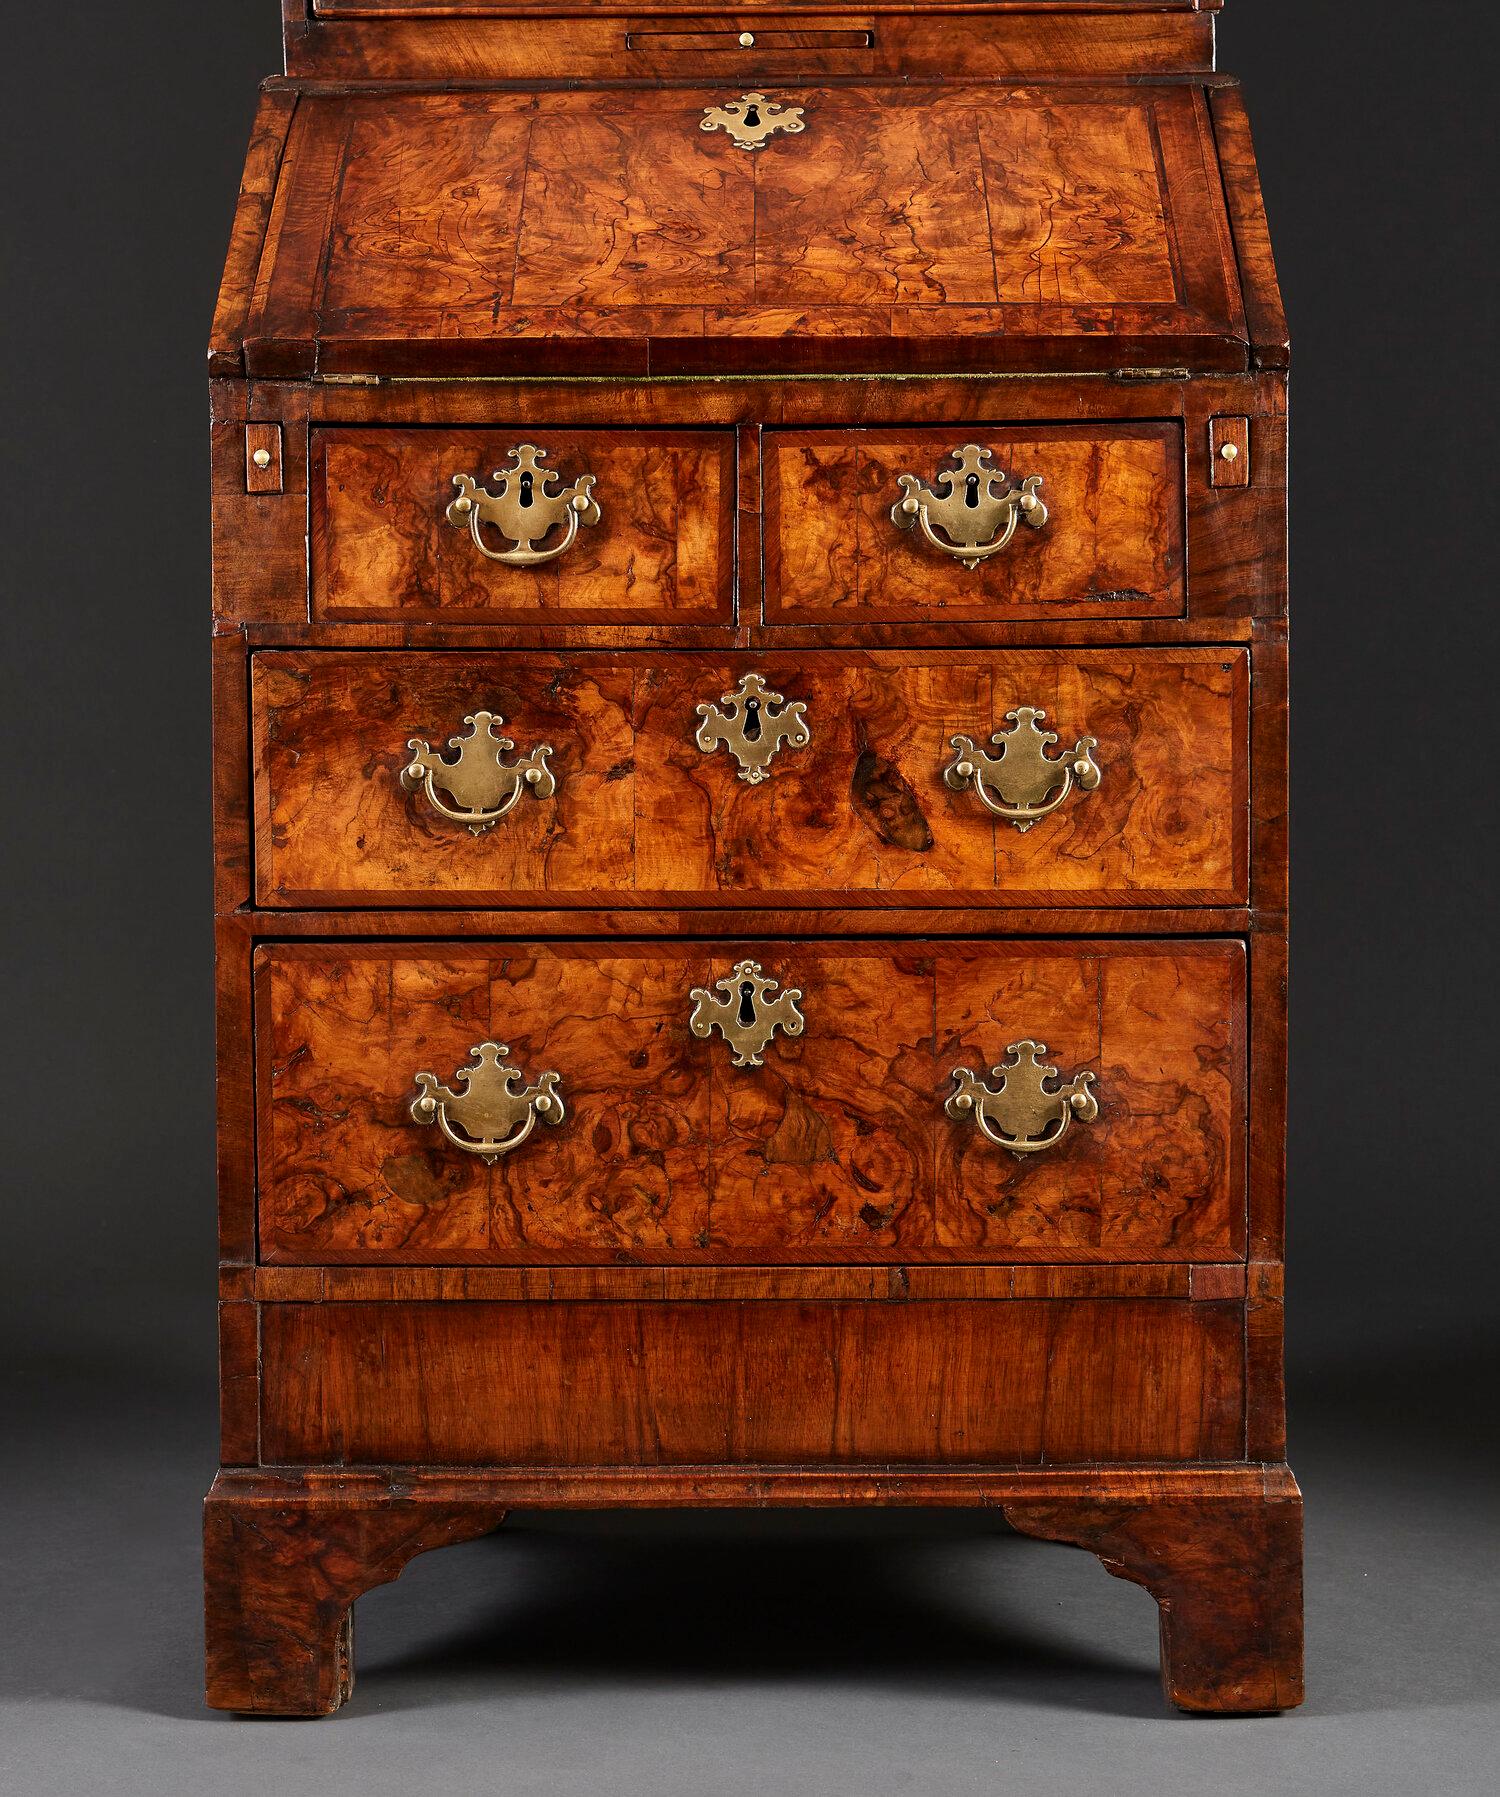 18th Century Queen Anne Bureau Bookcase of Narrow Proportions